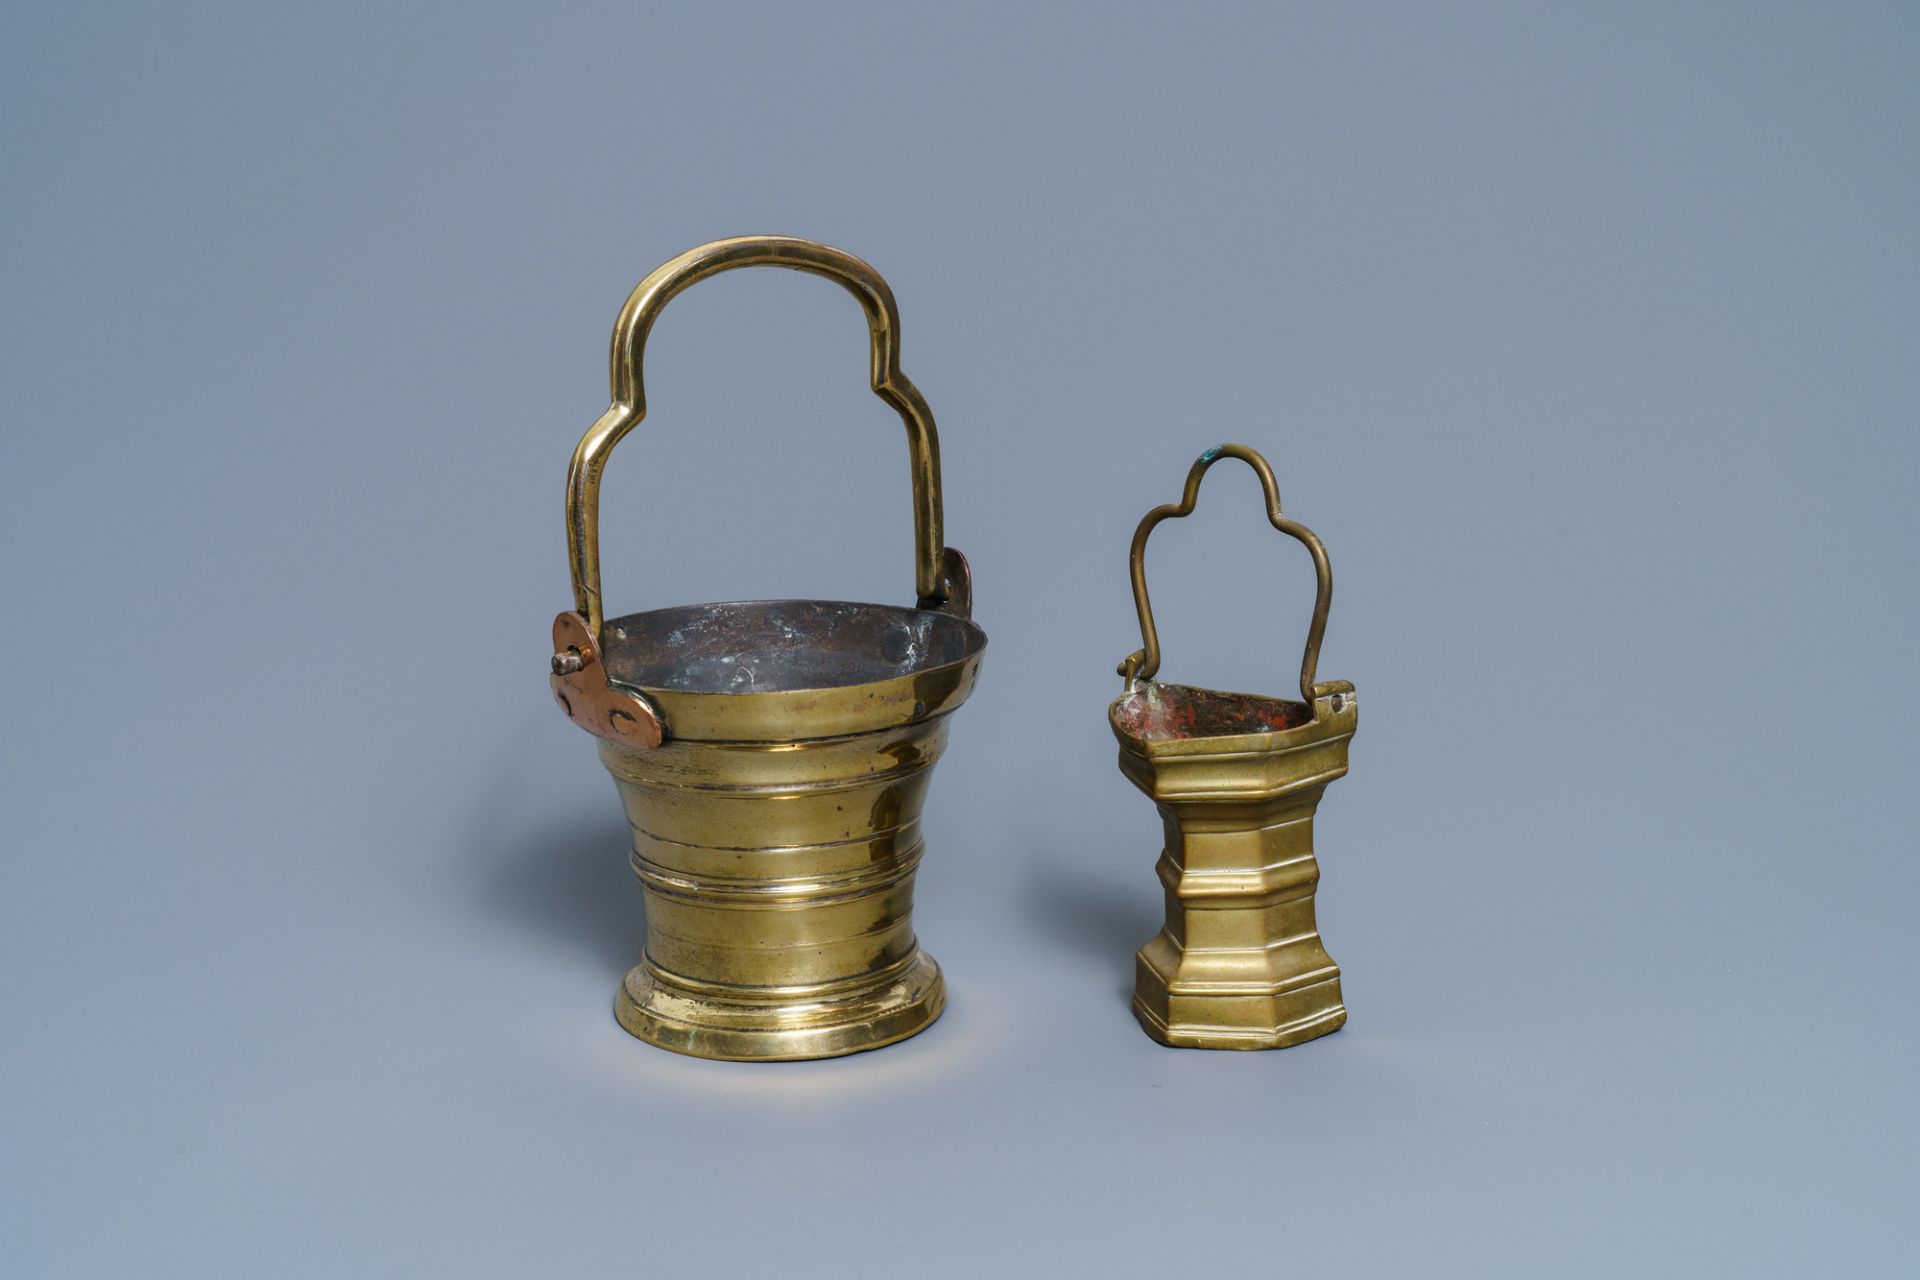 Two Flemish bronze holy water buckets, 1st half 16th C.